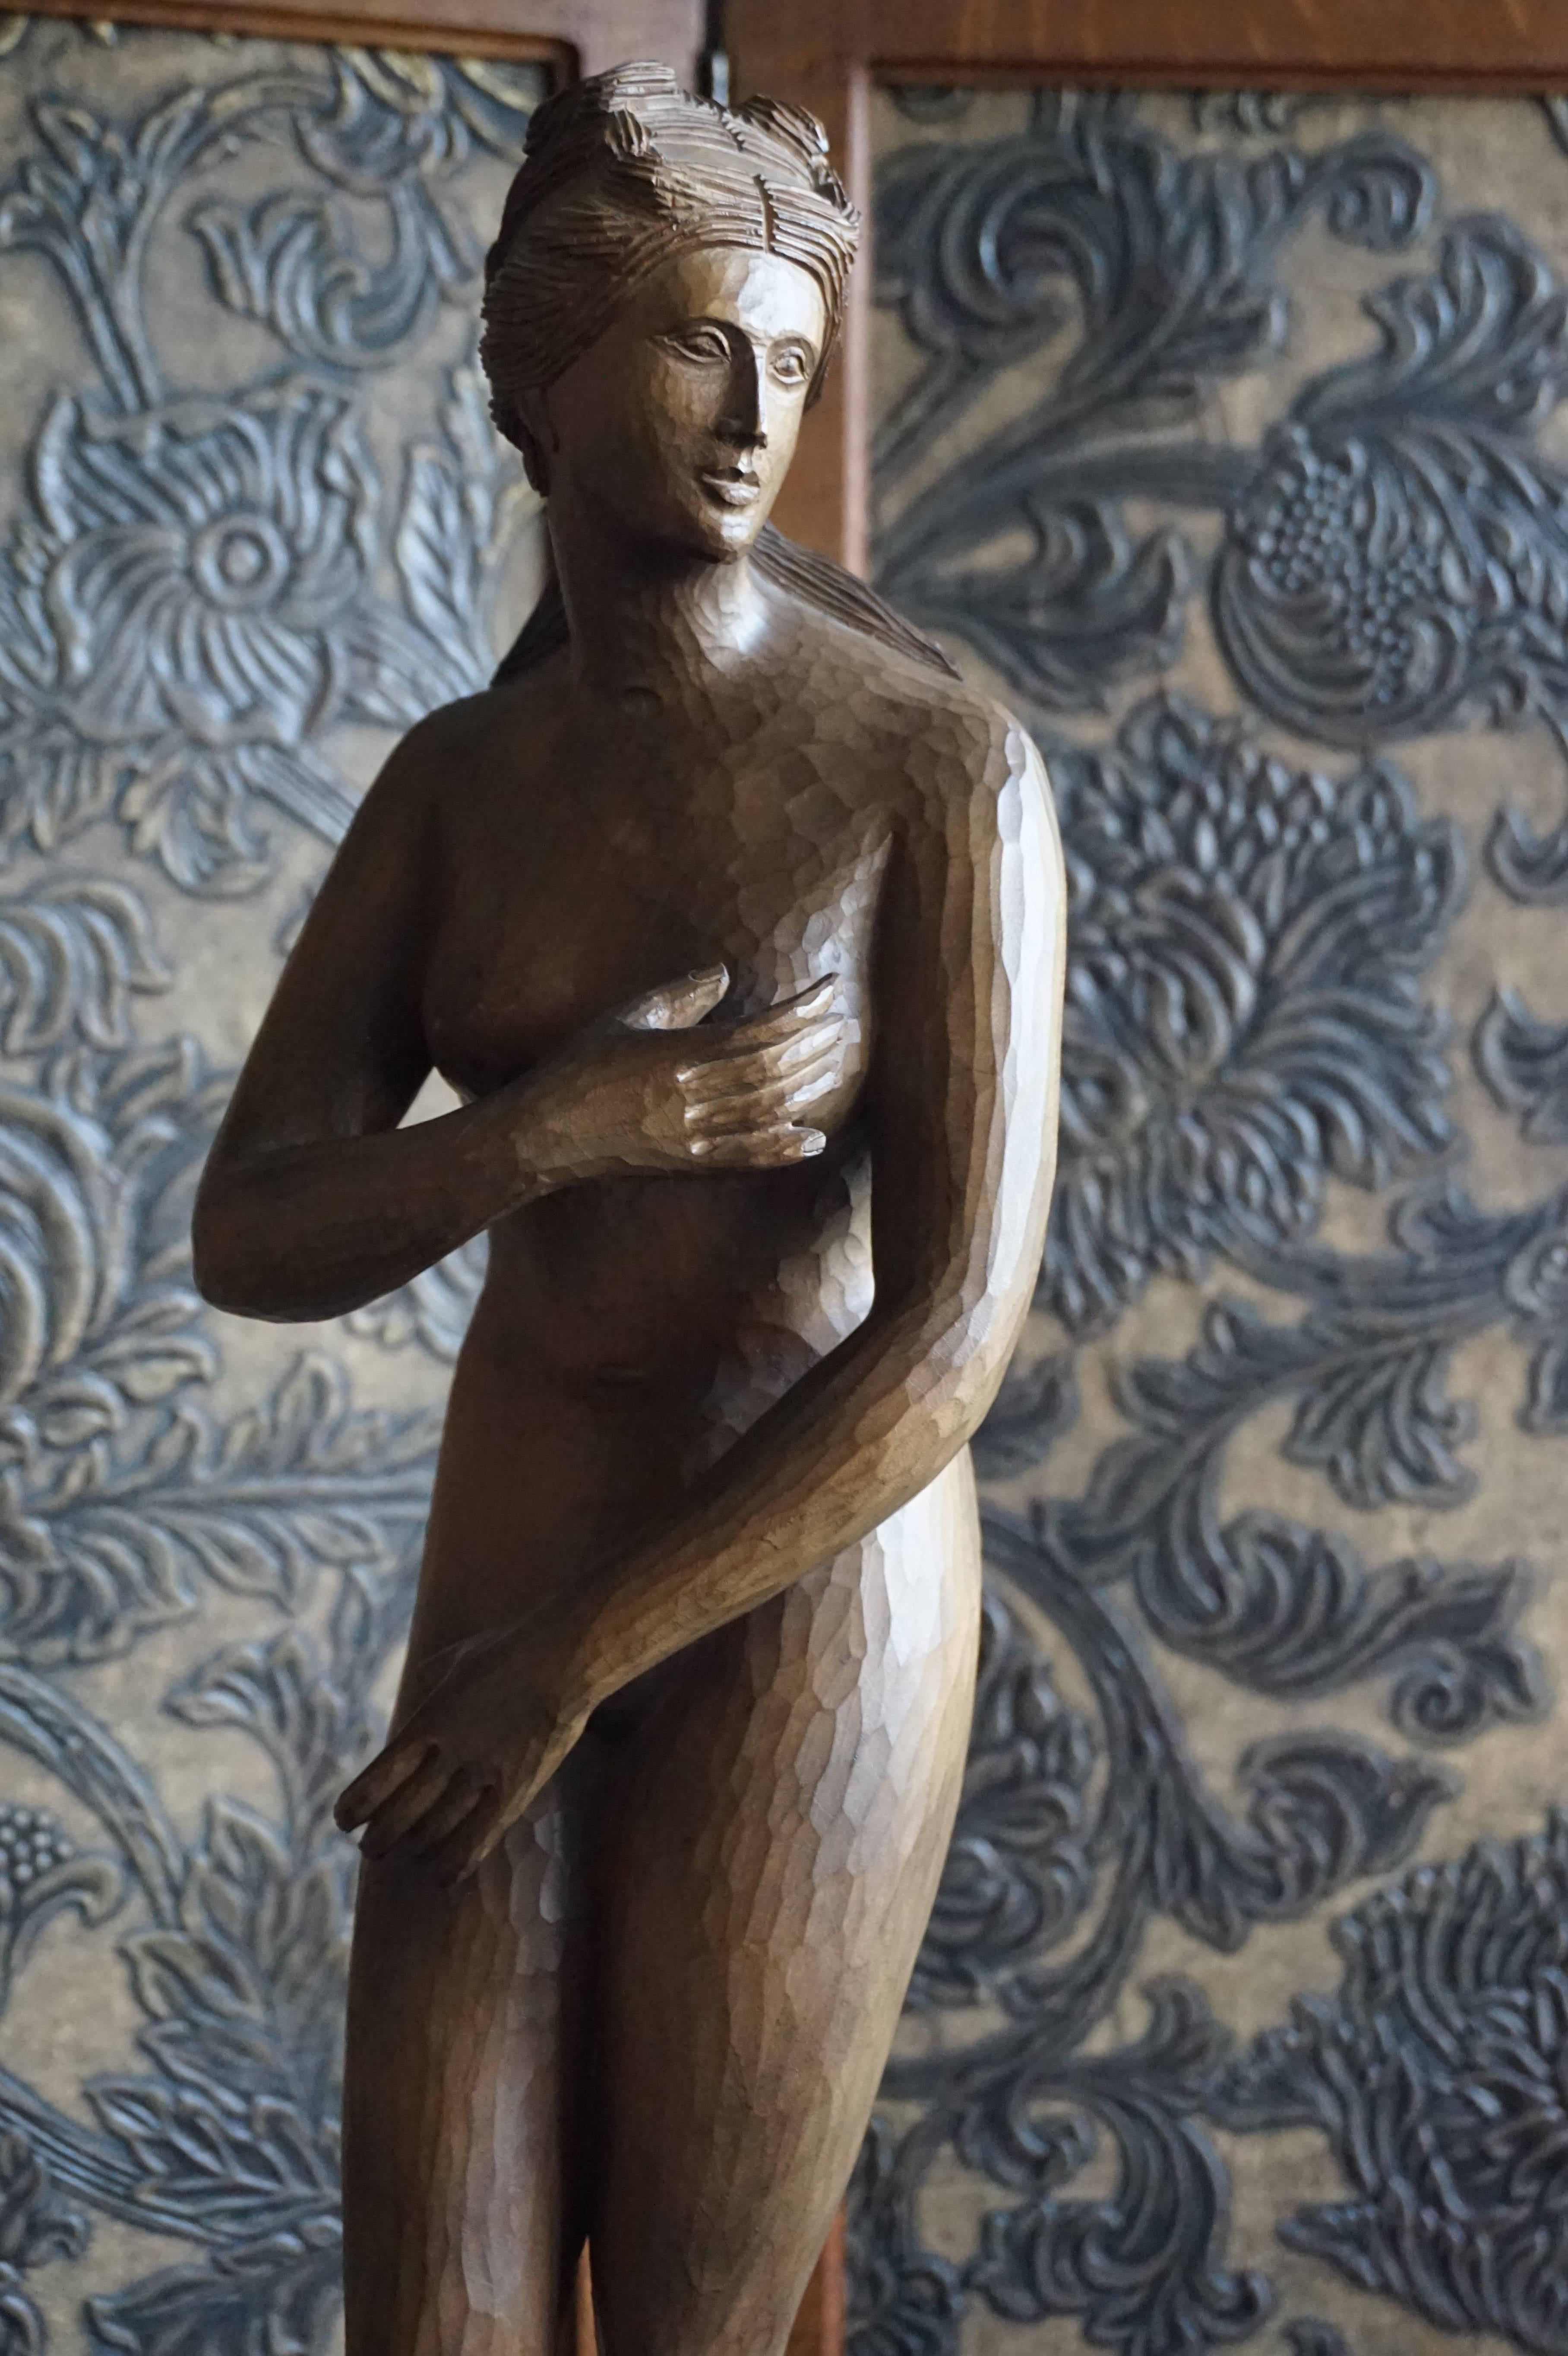 Stylish and decorative wooden female nude sculpture.

This relatively large sculpture is all hand-carved and in perfect condition. The special technique of carving, but not polishing the surface makes this classical nude look more ancient and